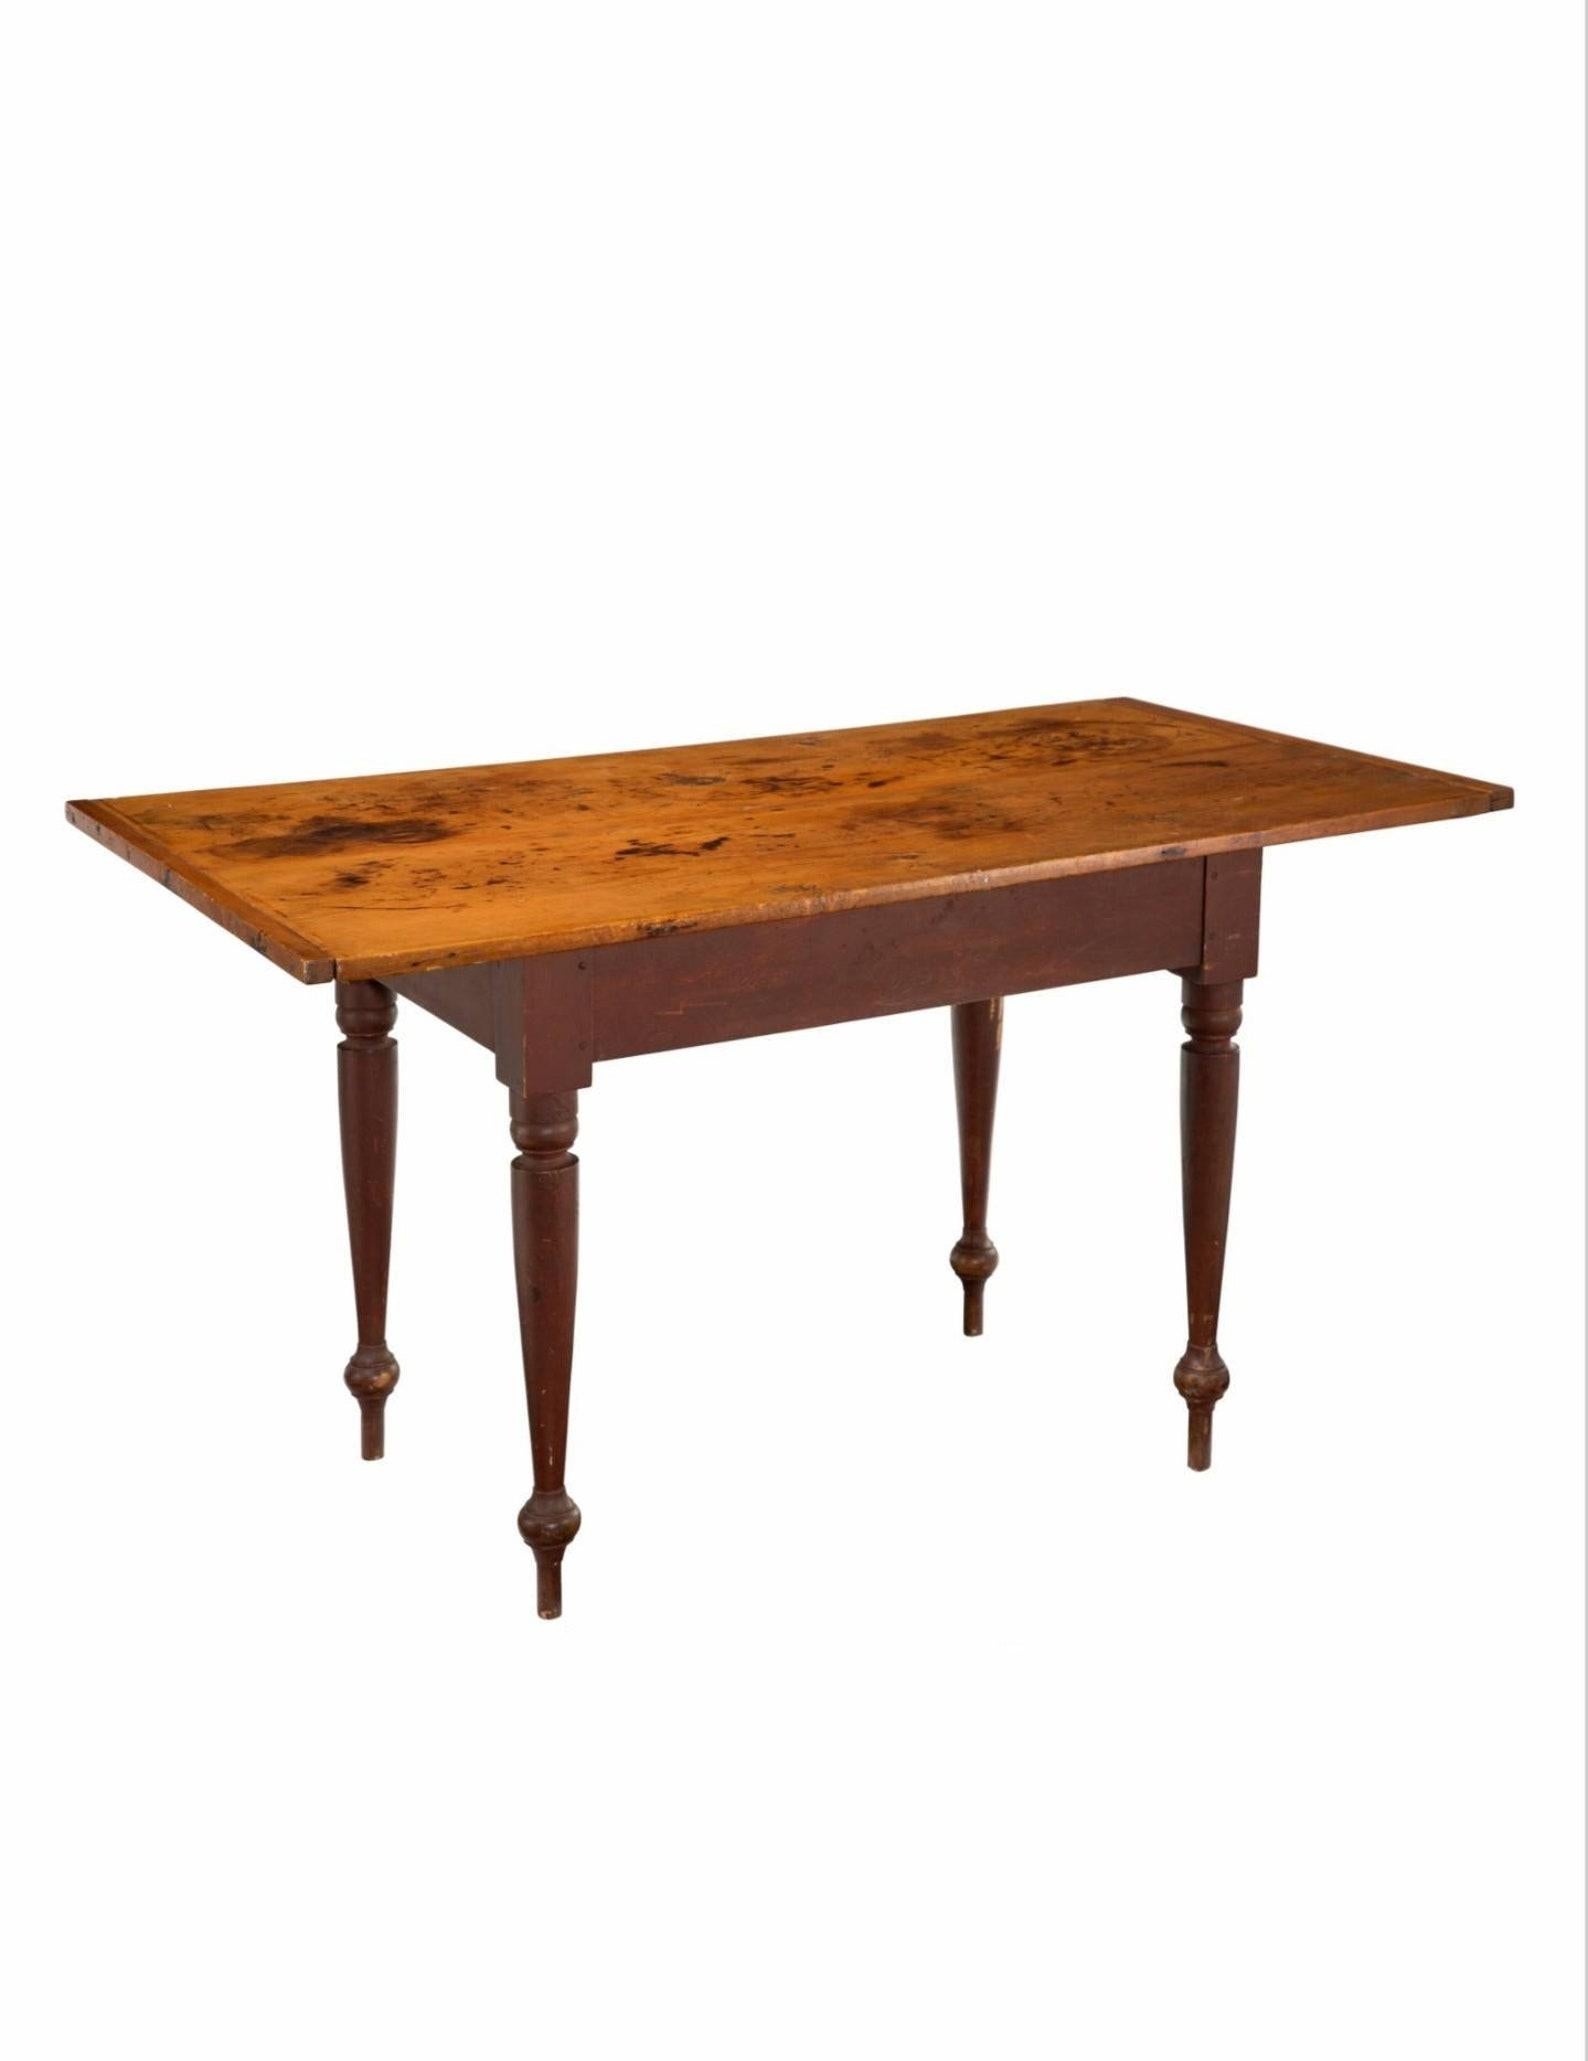 An early American country farmhouse double pine board harvest table with beautifully aged patina. circa 1800-1810

Born in the Northeastern United States in the early 19th century with later element, handmade by a farmer, most likely skilled but